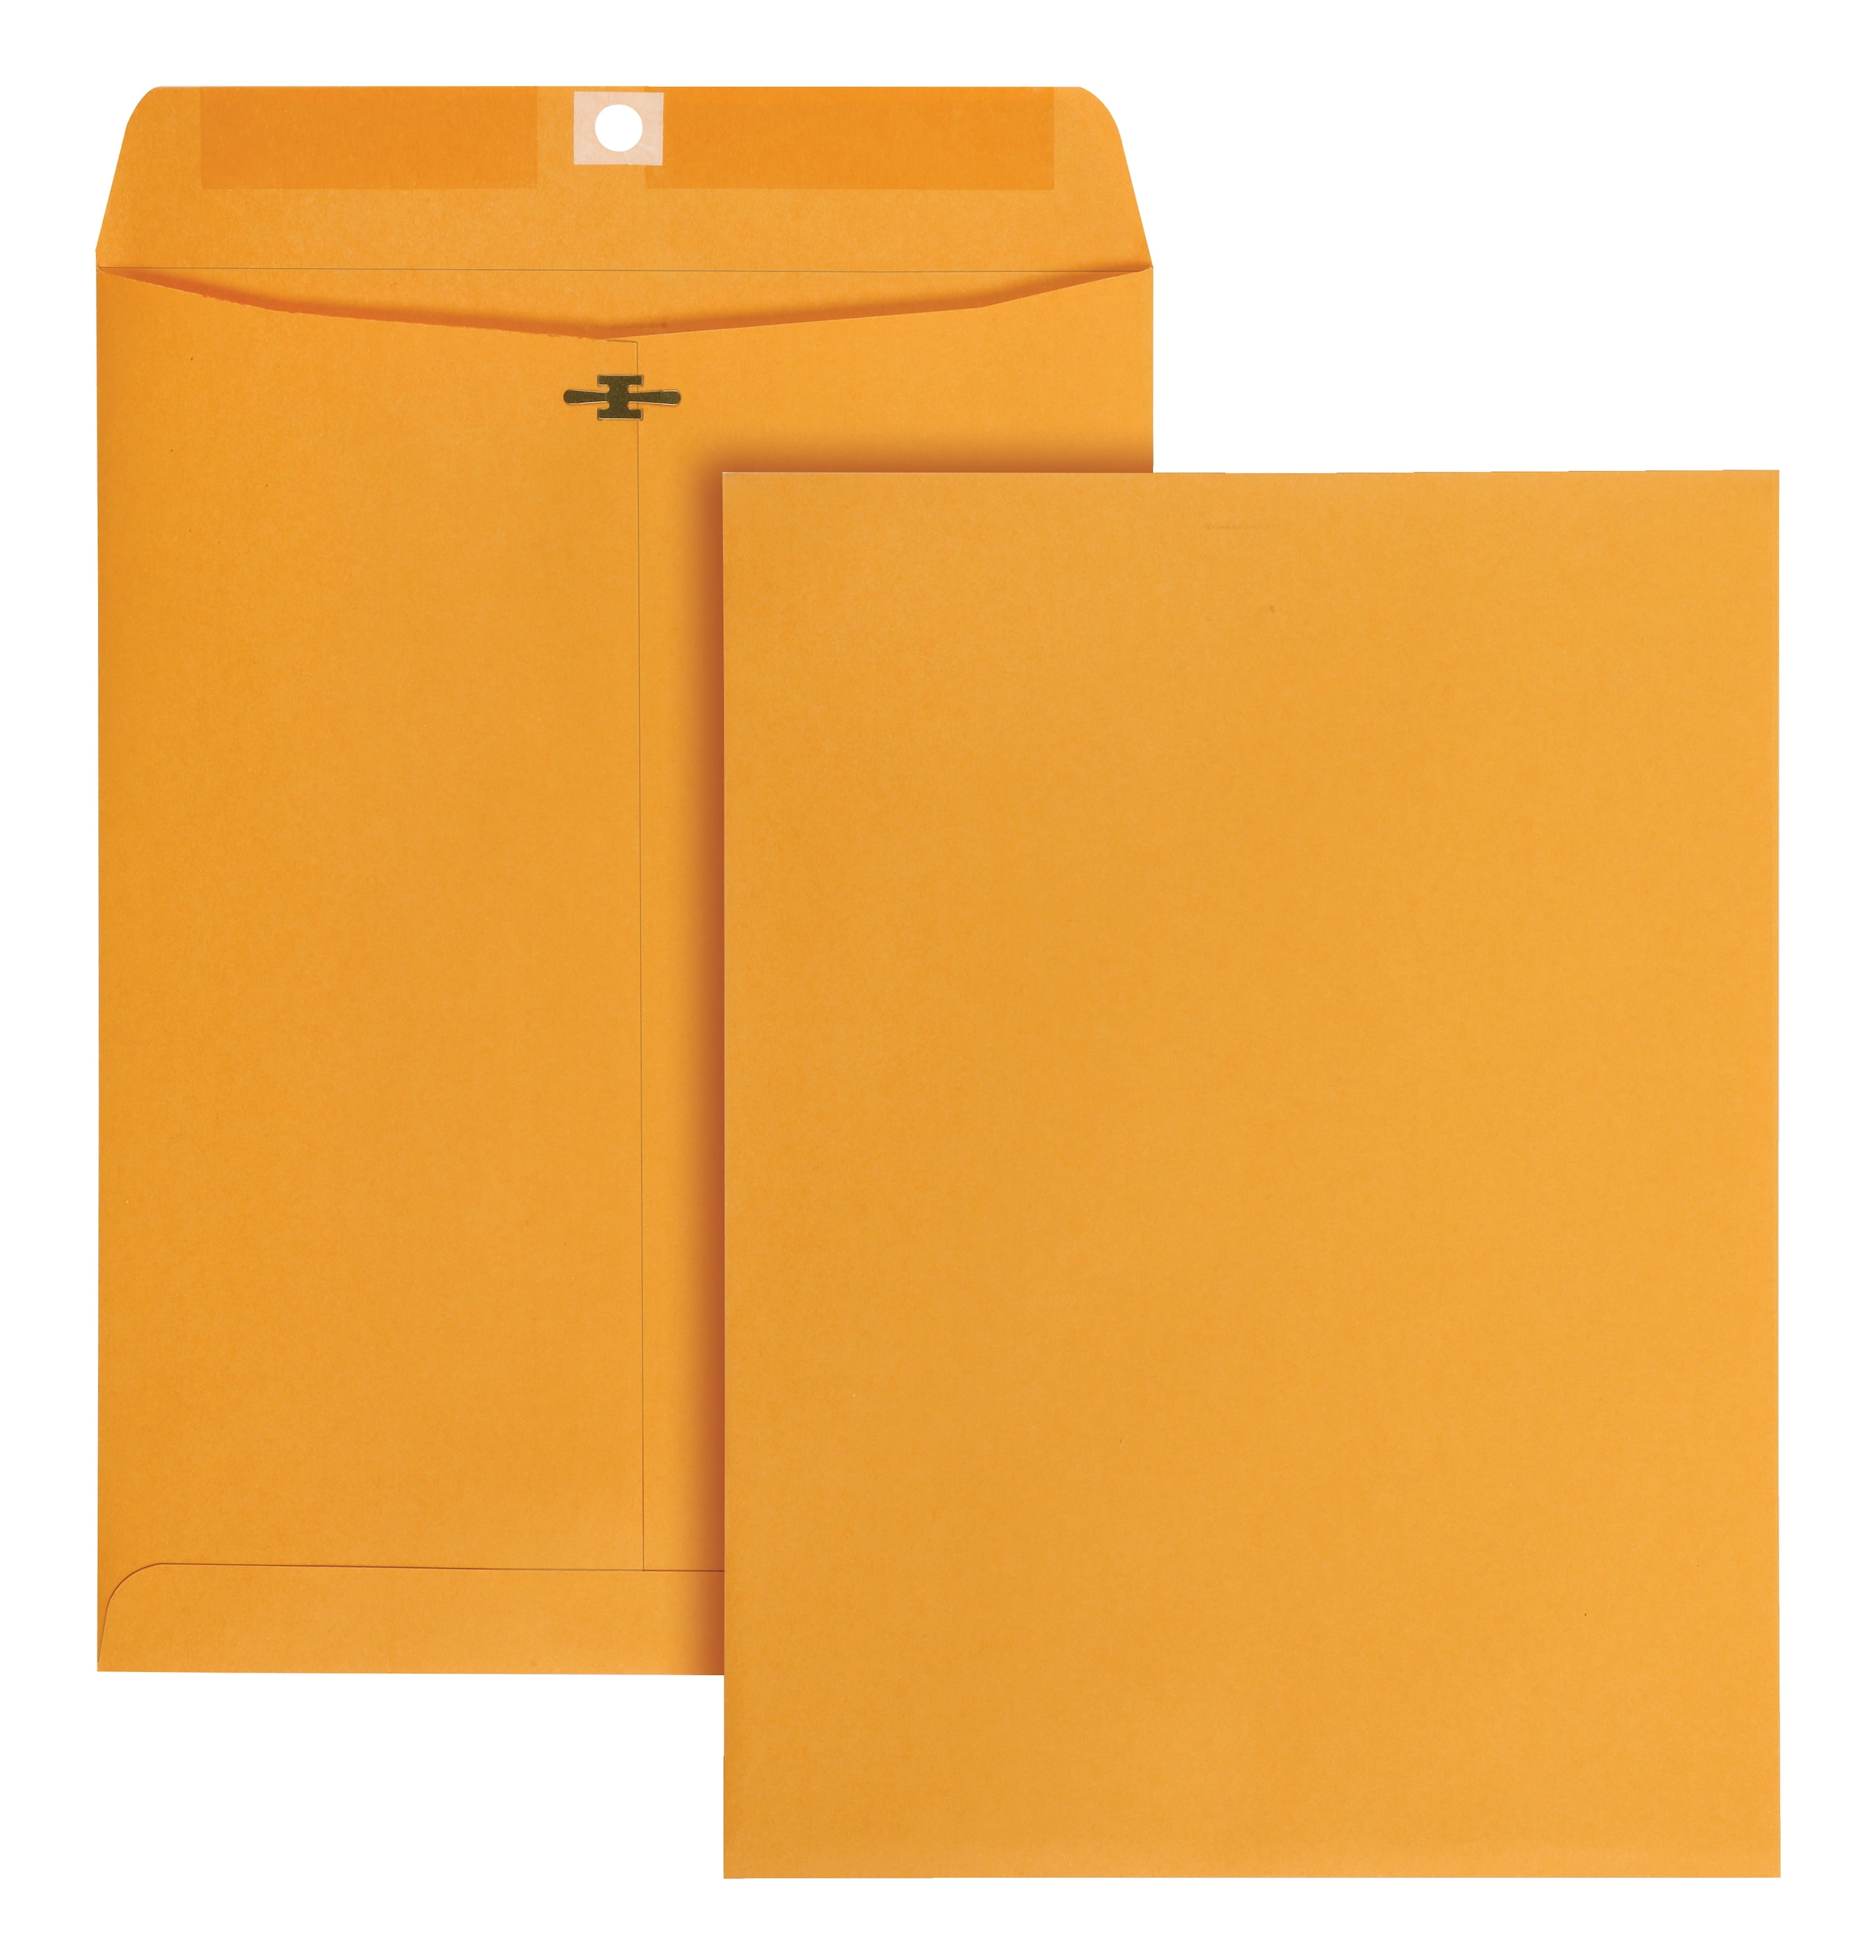 Storing or Mailing Documents 28 lb Brown Kraft Quality Park 9 x 12 Clasp Envelopes with Deeply Gummed Flaps Renewed Great for Filing 100 per Box 37890 